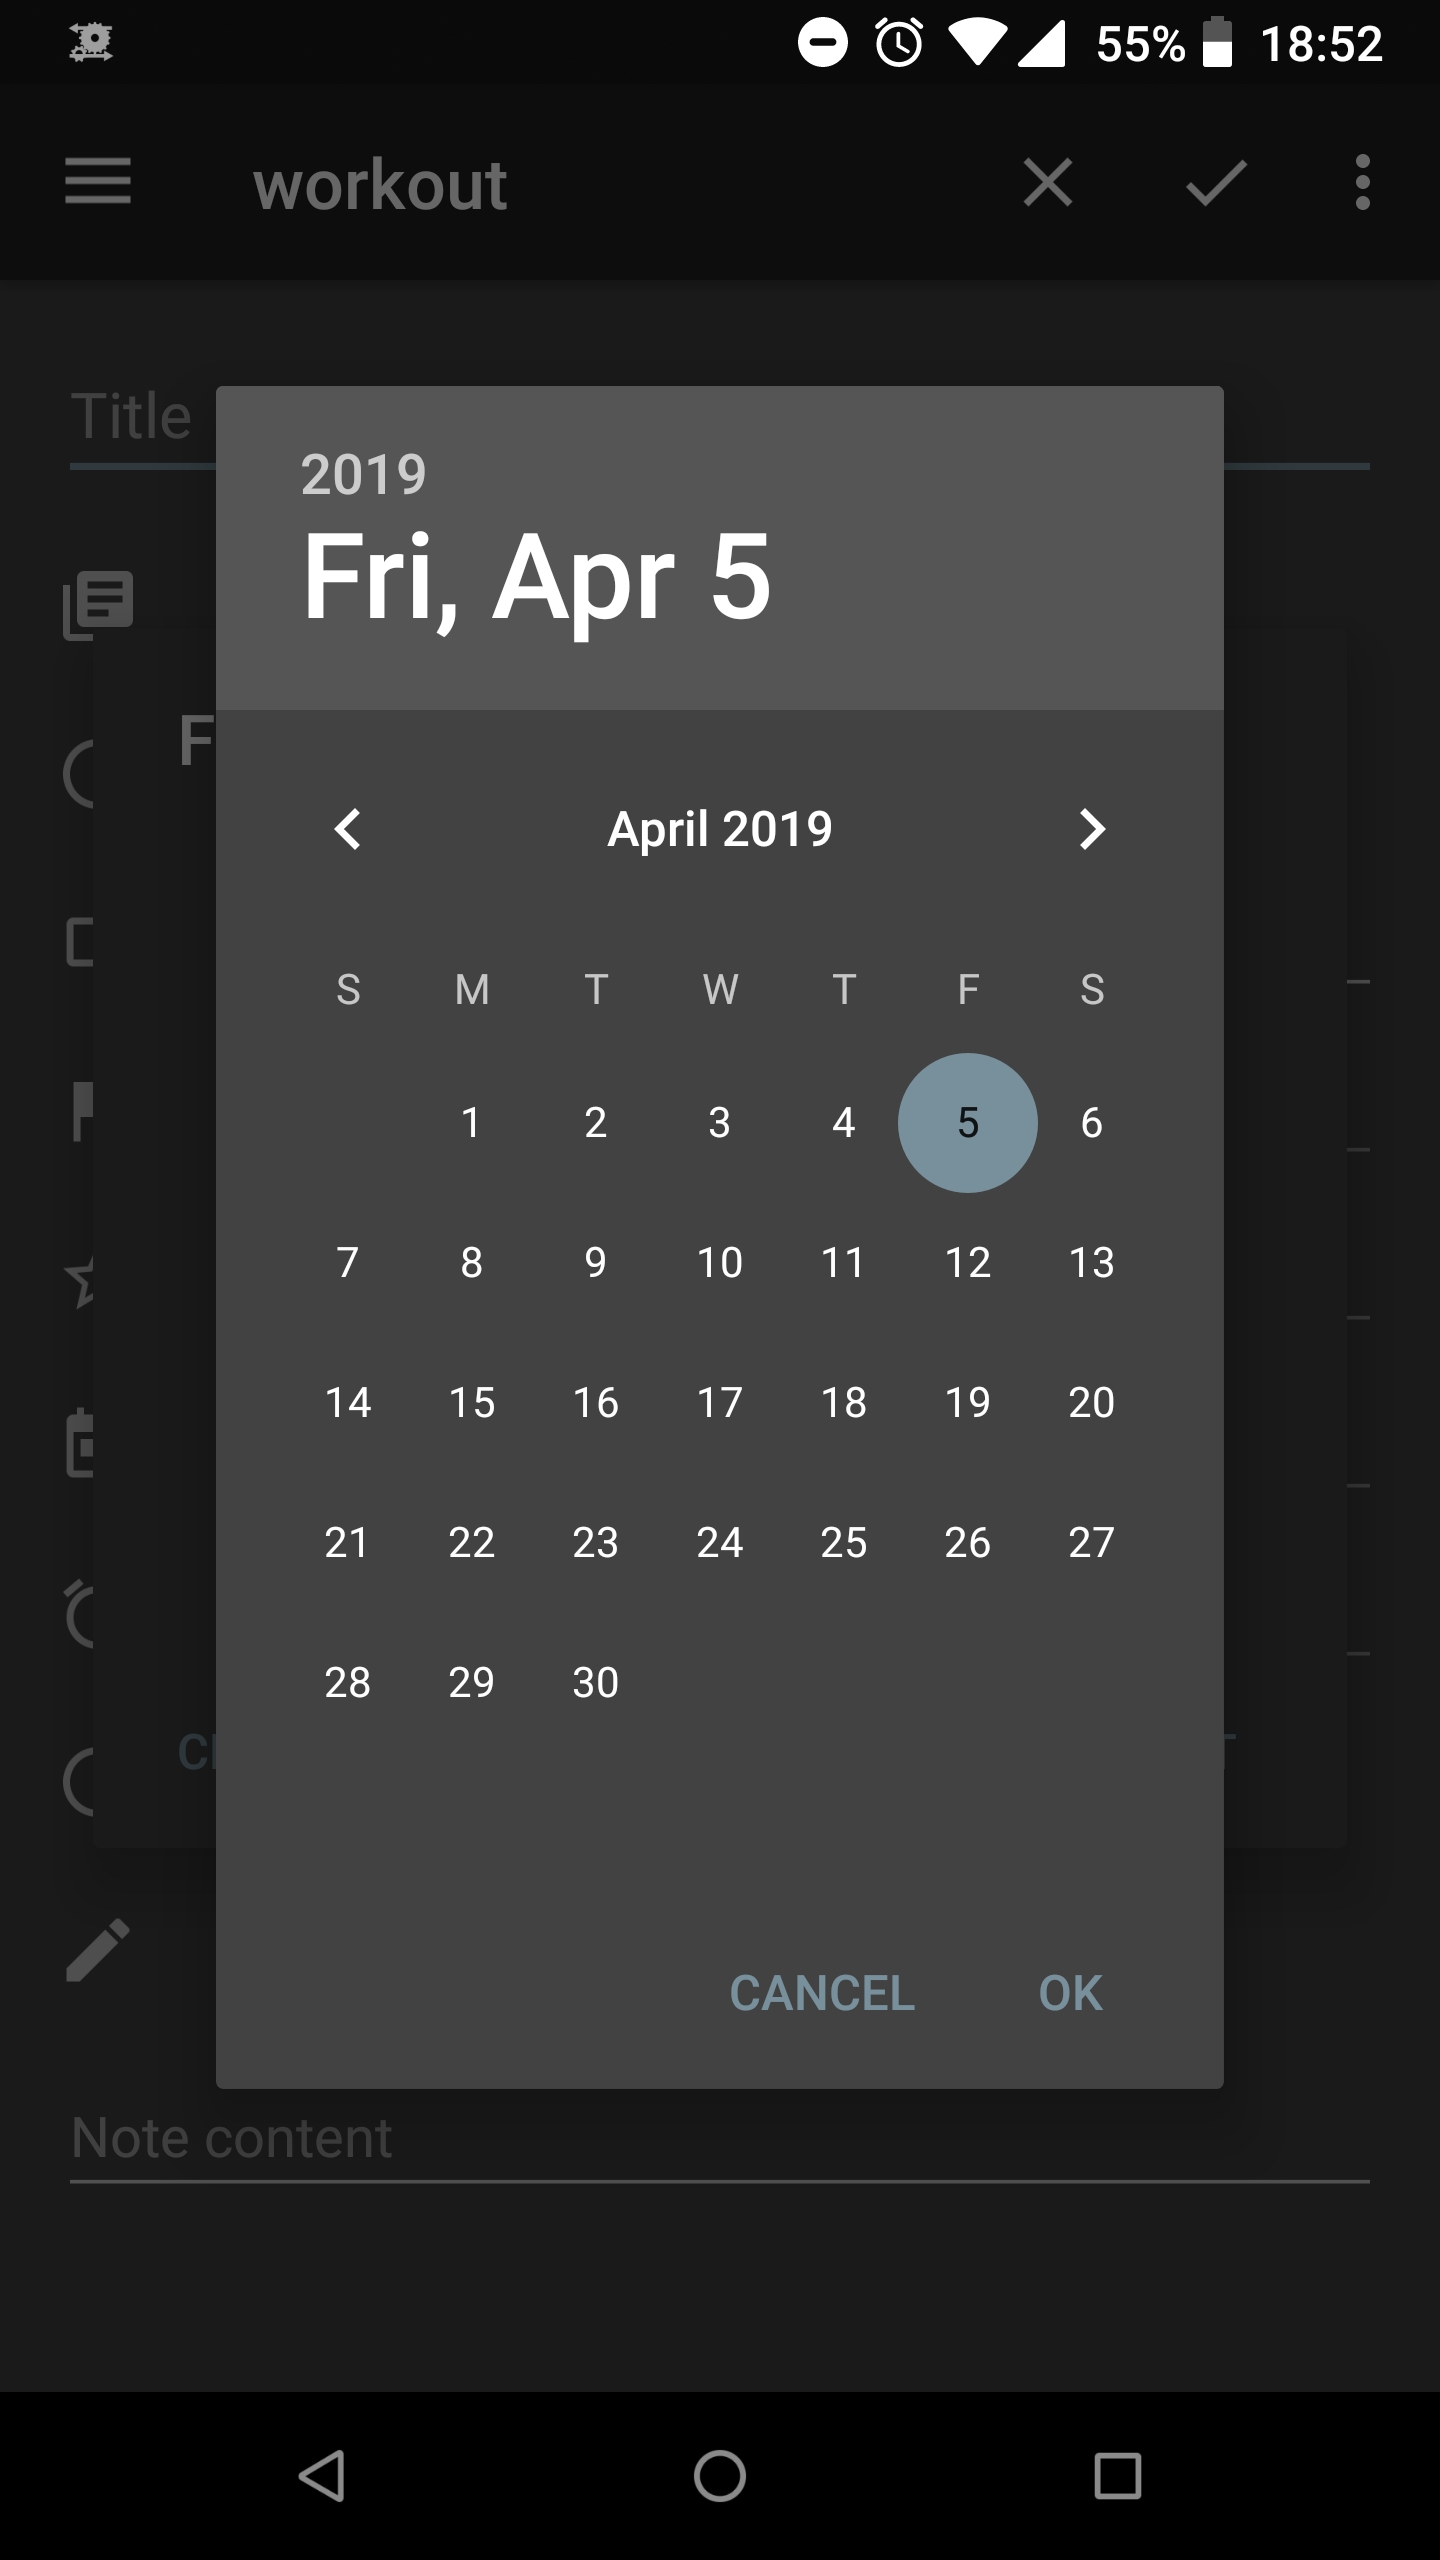 Change Week Start Day In Calendar For Date Selection · Issue